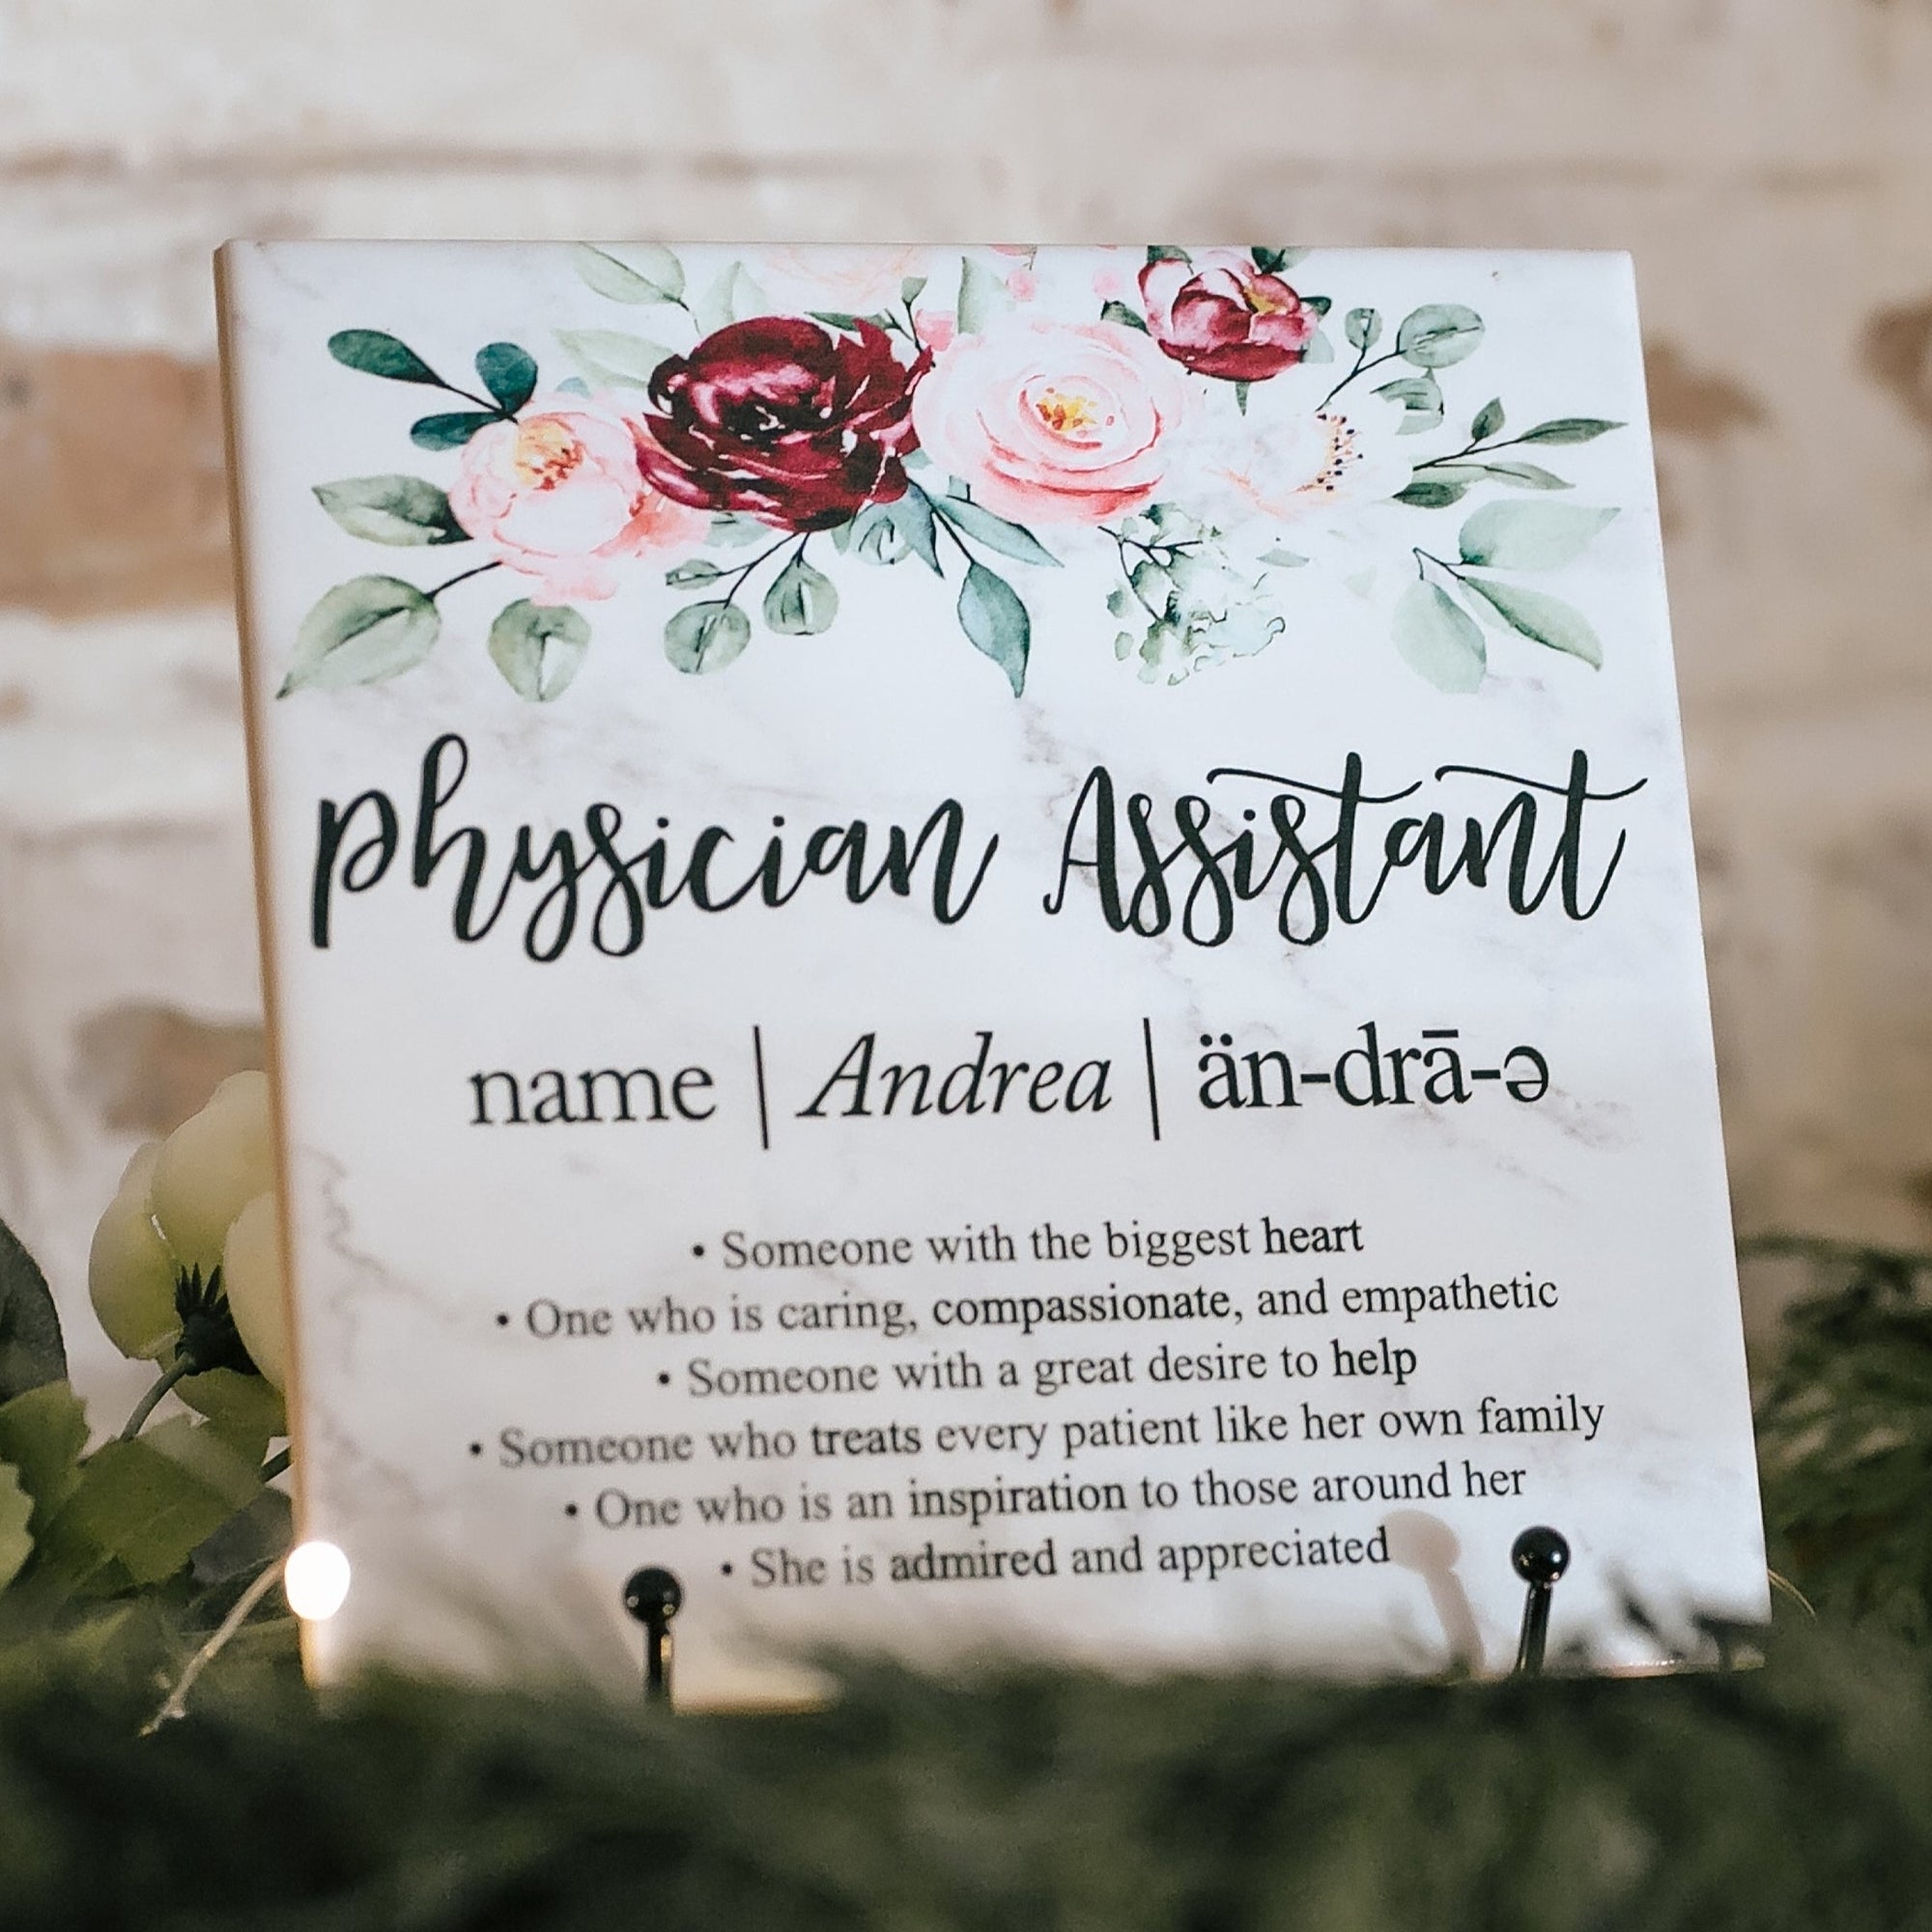 Physician's Assistant Definition Quote Art Tile Sign